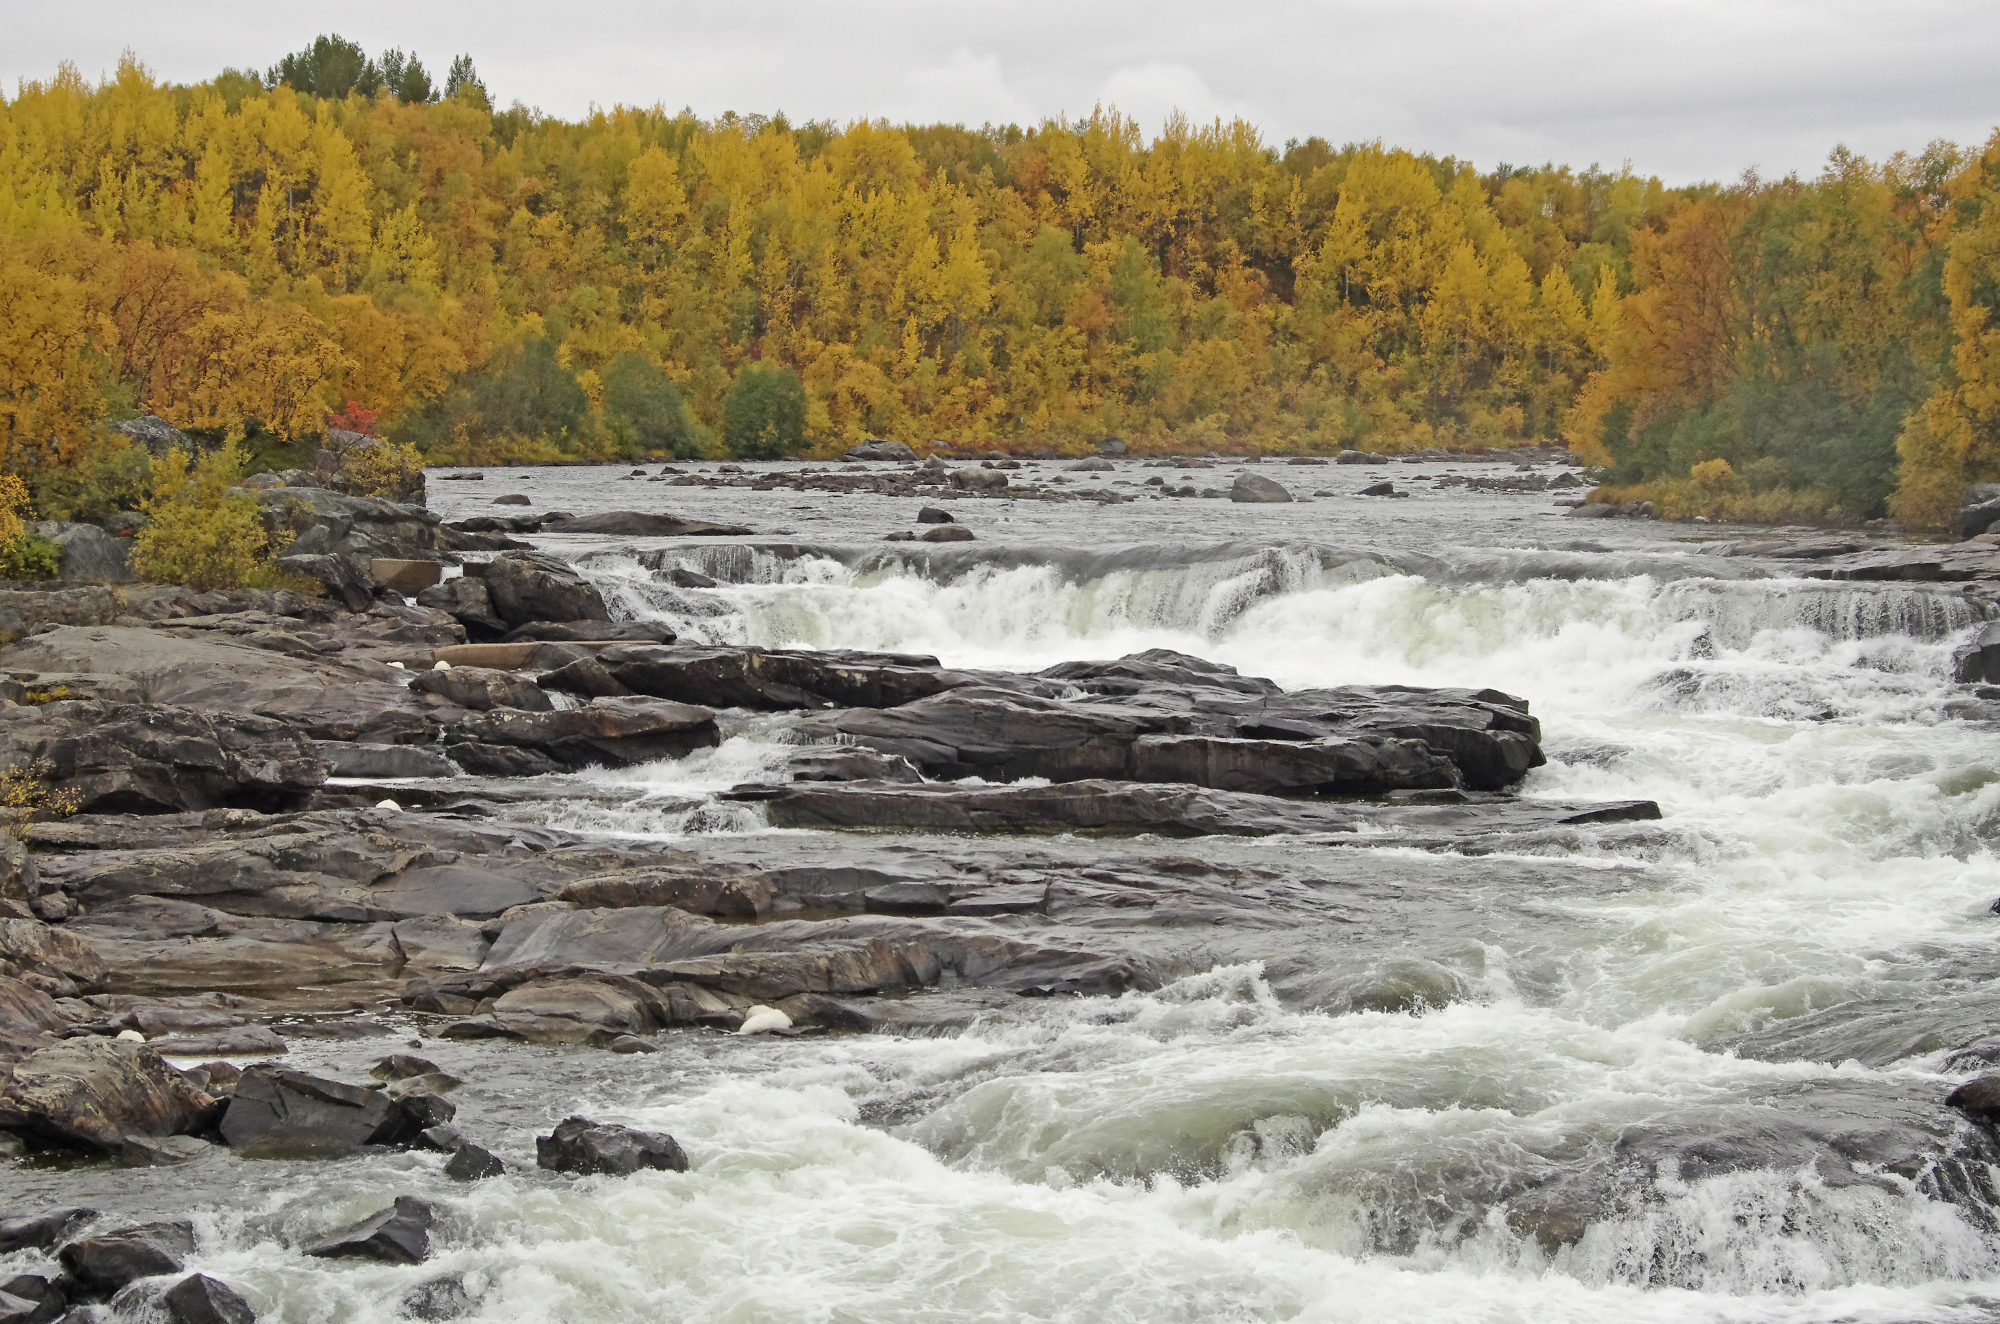 Autumn colours at Neiden rapids in north-eastern Norway